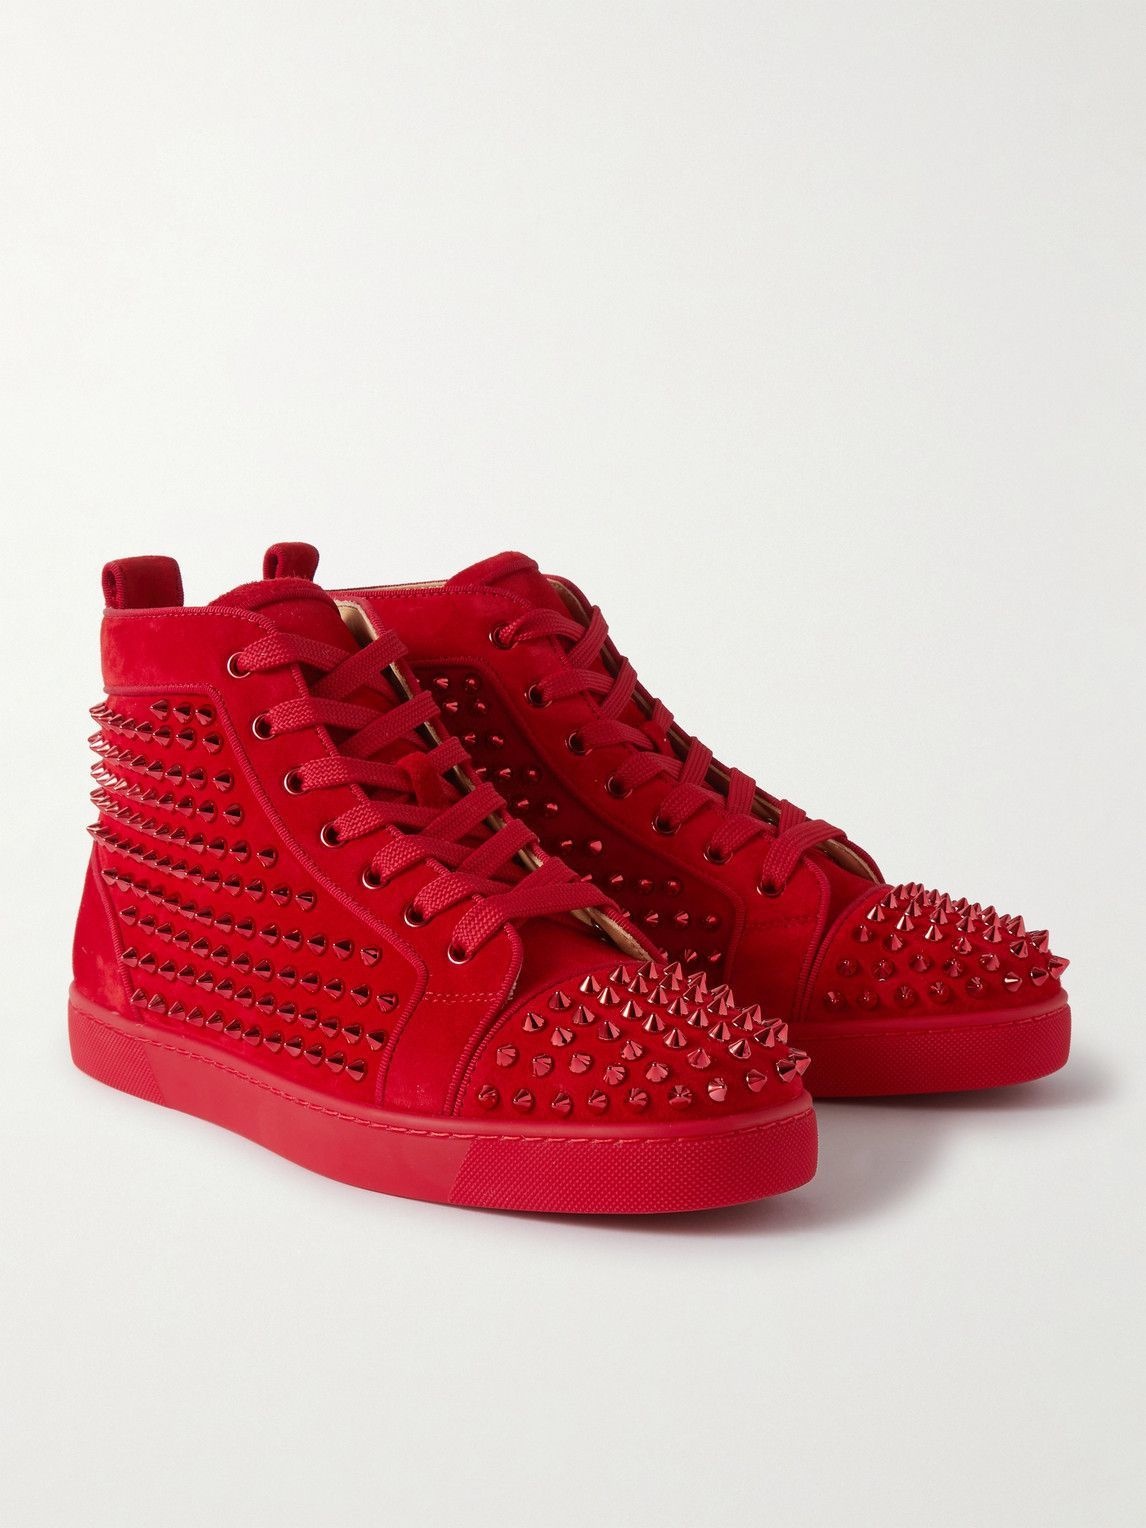 Christian Louboutin Red Suede Orlato High Top Sneakers Size 44.5